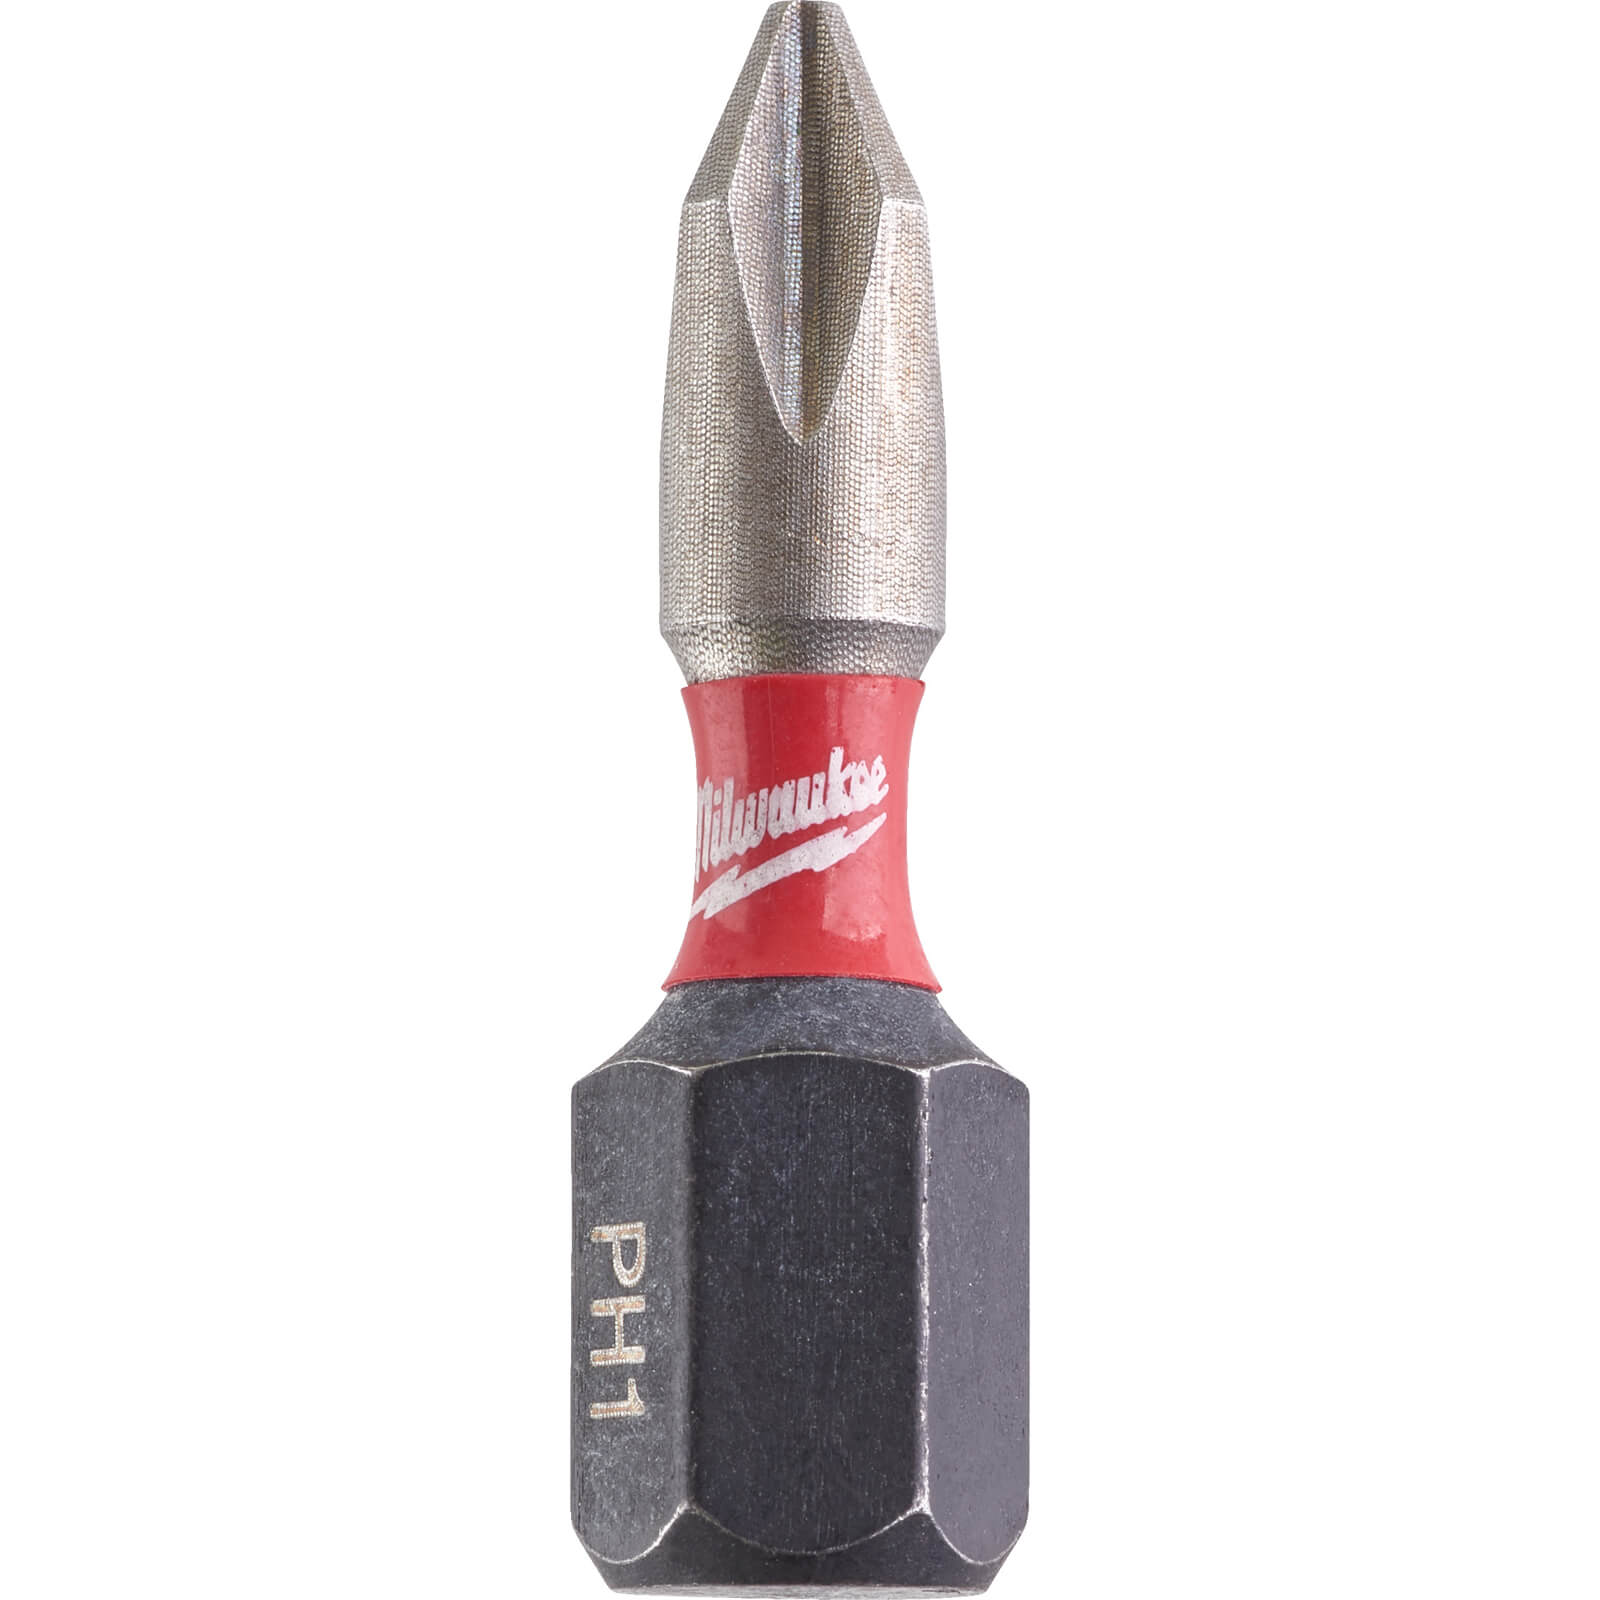 Image of Milwaukee Shockwave Impact Duty Phillips Screwdriver Bits PH1 25mm Pack of 2